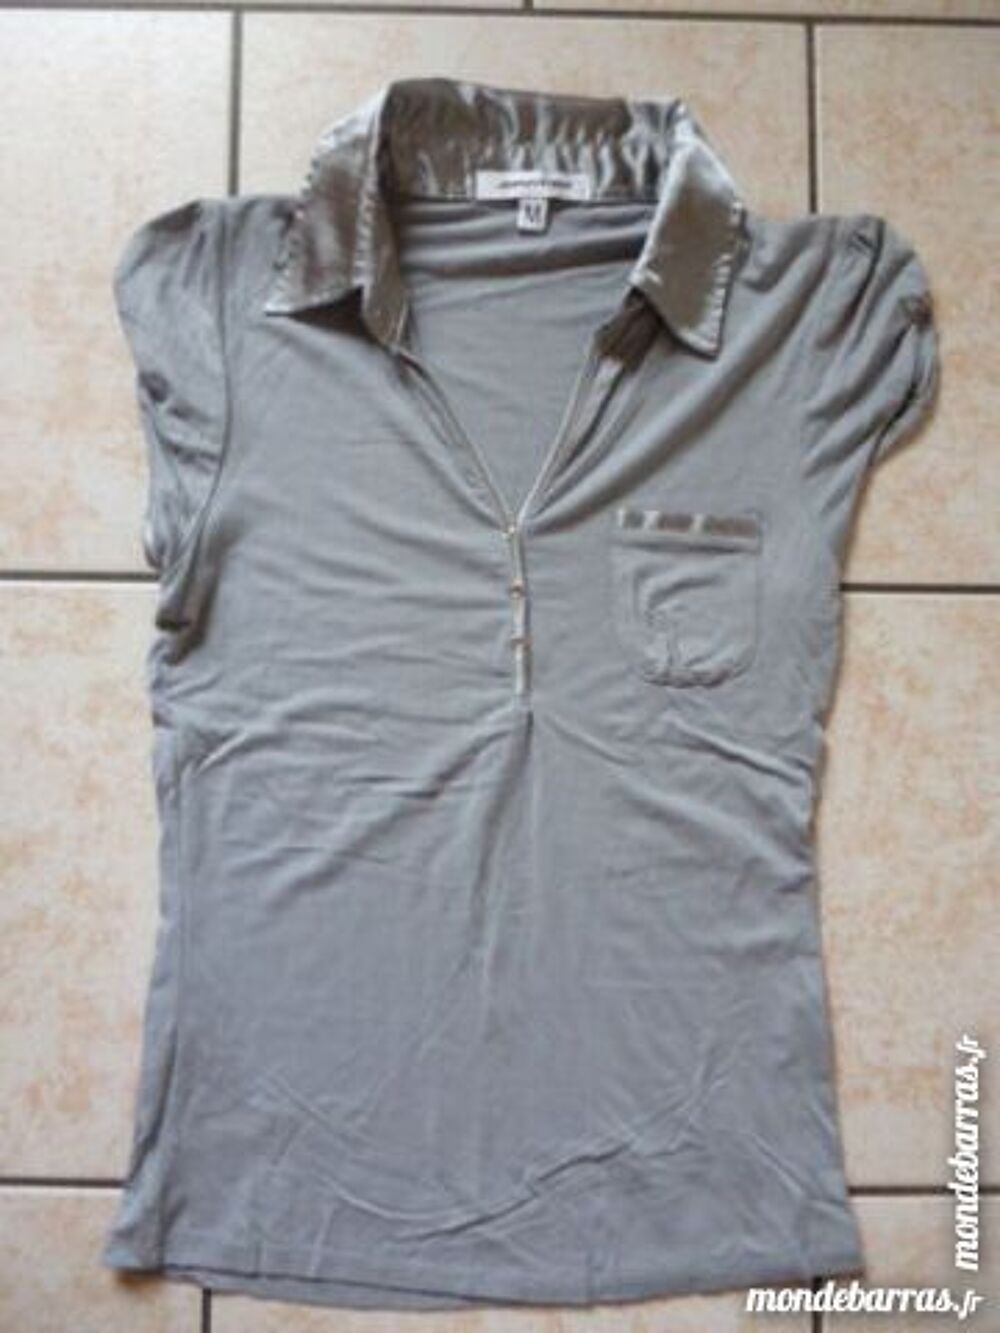 Tee-shirt forme polo gris clair &laquo; Jennyfer &raquo; T.36 Vtements